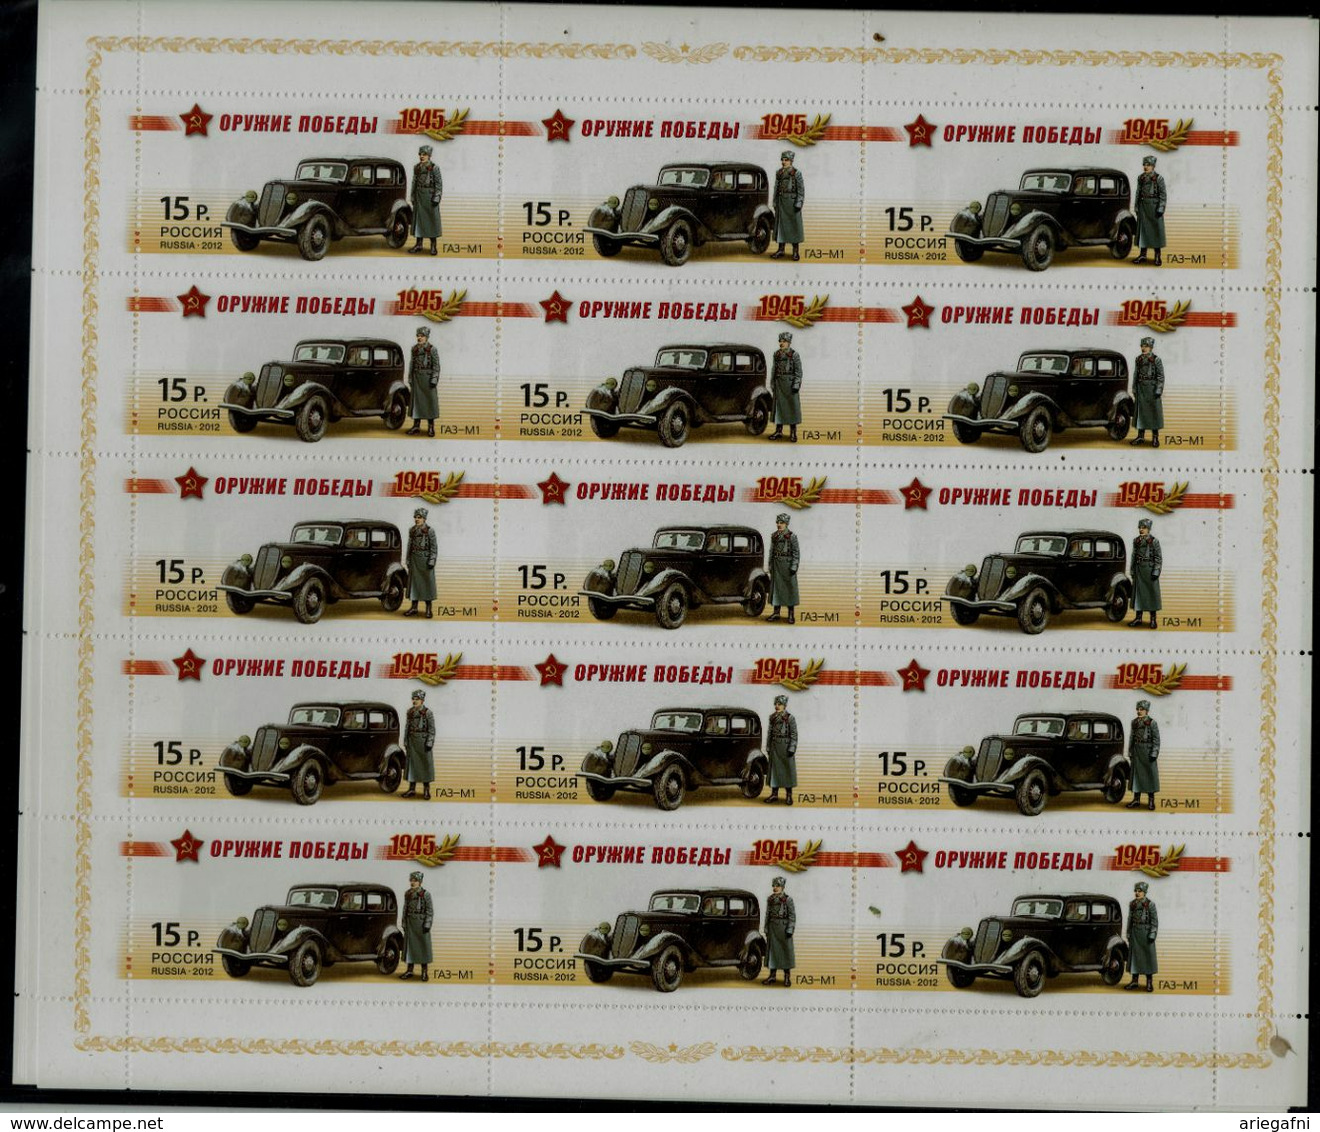 RUSSIA 2012 ARMS OF VICTORY: MOTOR VEHICLES SET OF 4 FULL SHEET MI No 181-4 MNH VF !! - Feuilles Complètes